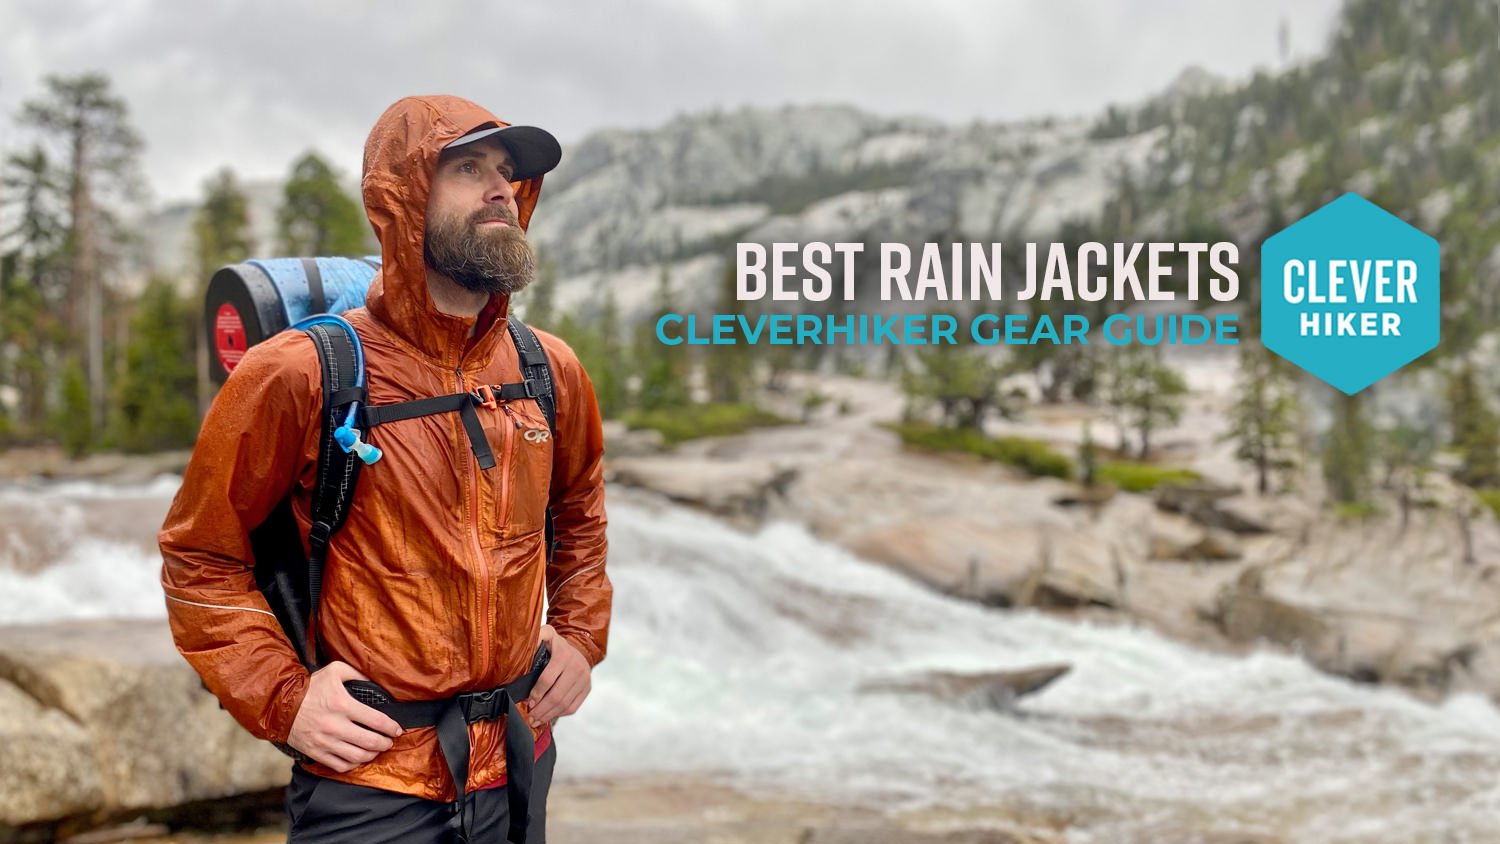 Outdoor Gear for All Seasons: The Ultimate Guide